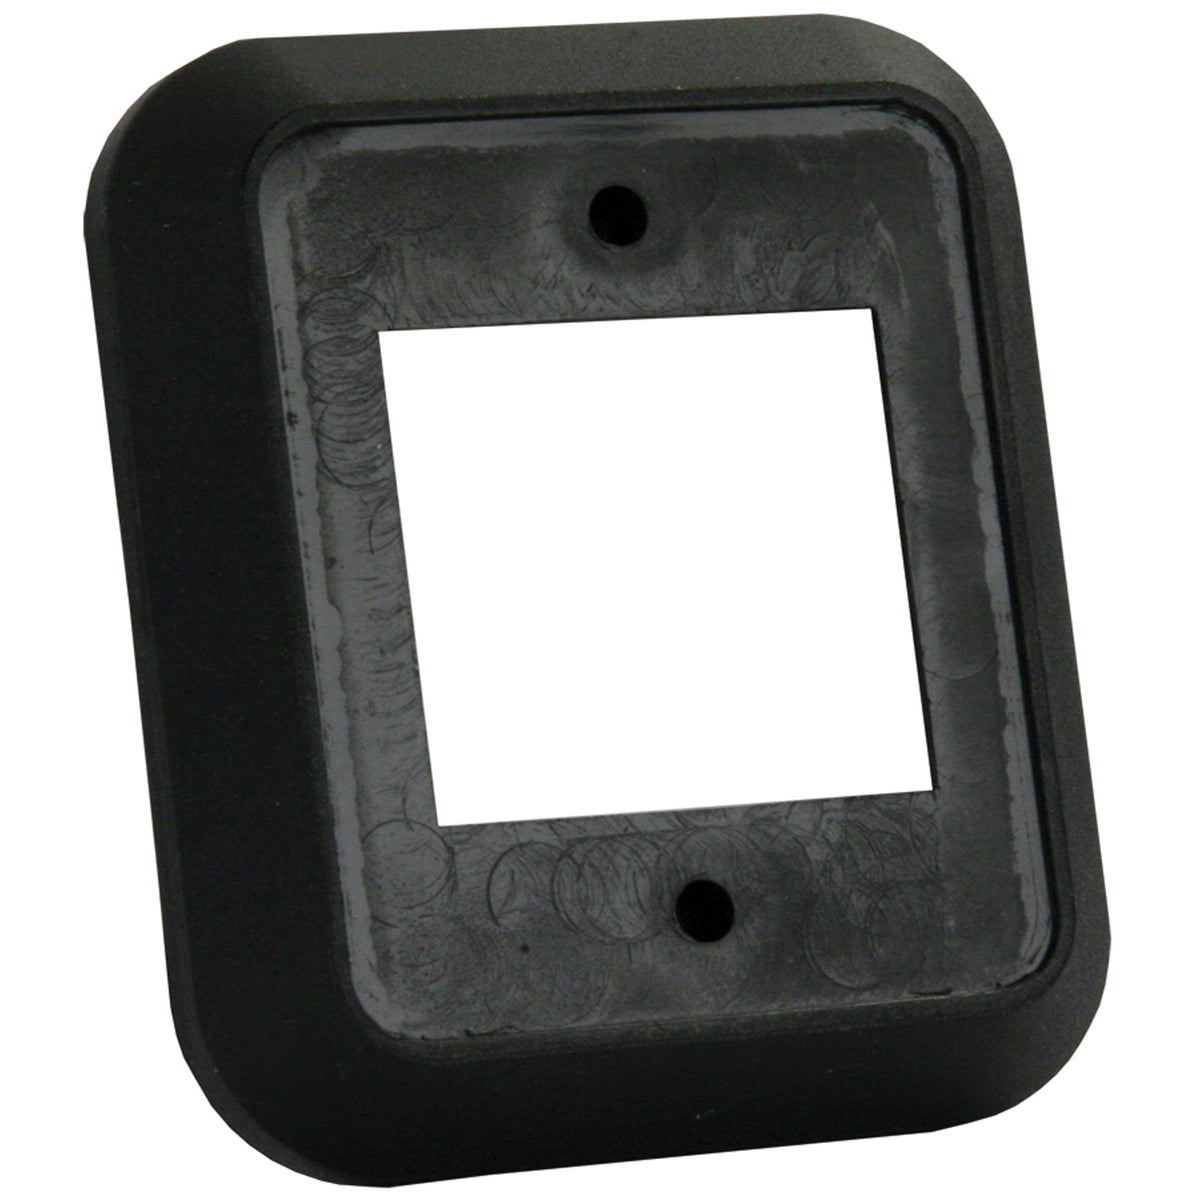 JR Products 13525 Double Switch Wall Spacer - Black